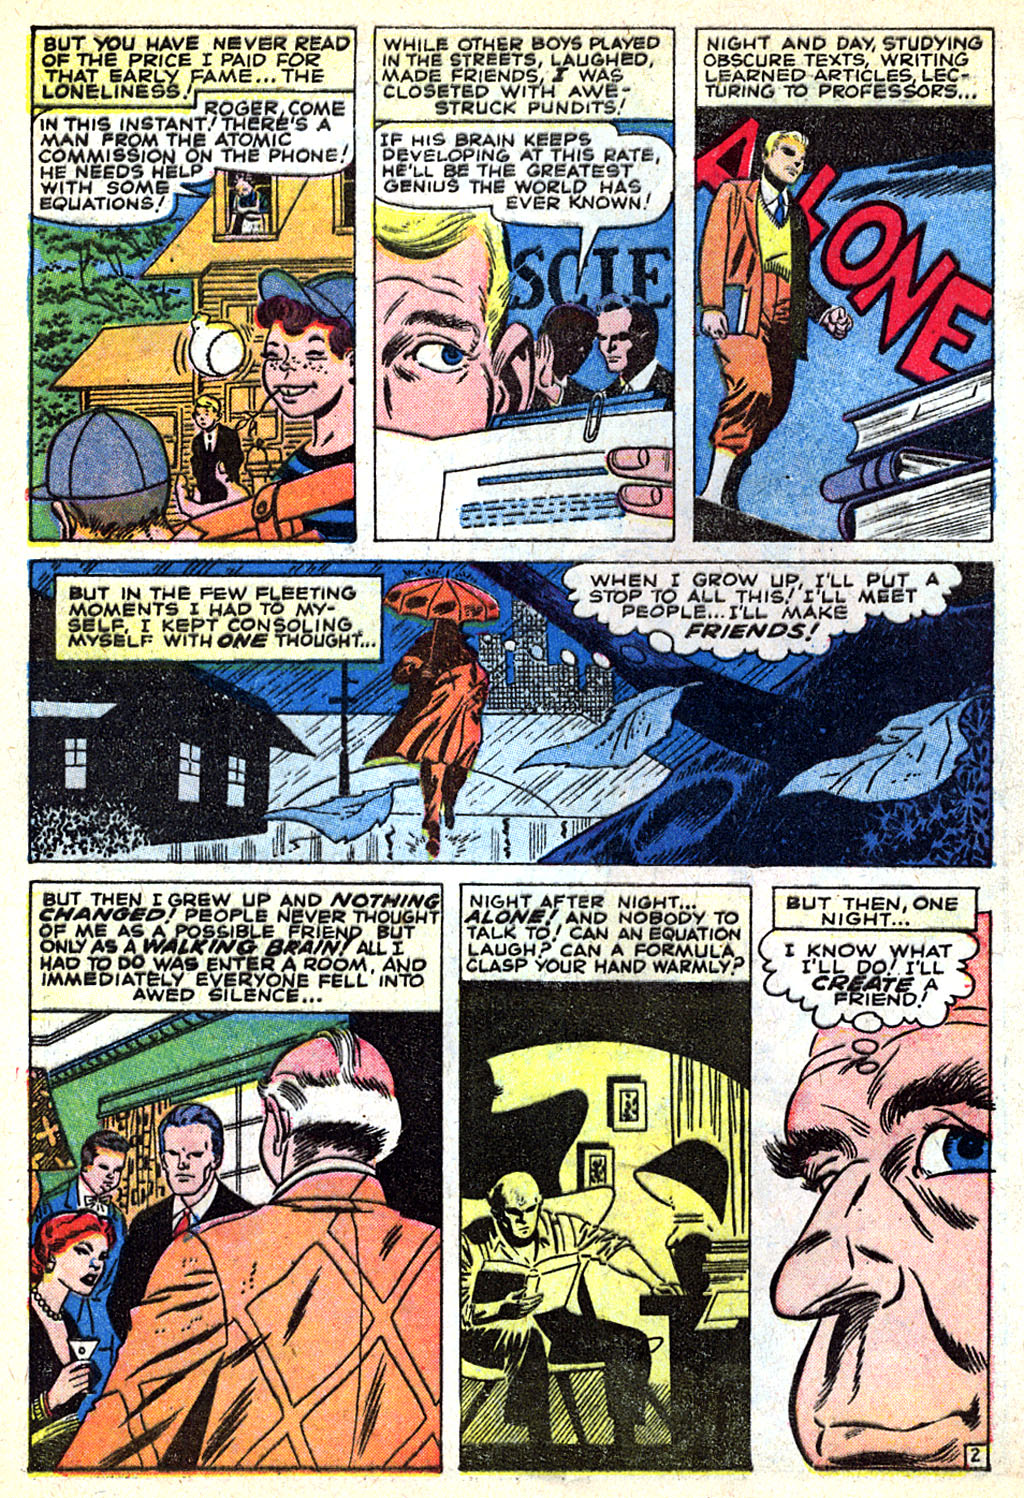 Marvel Tales (1949) 137 Page 3